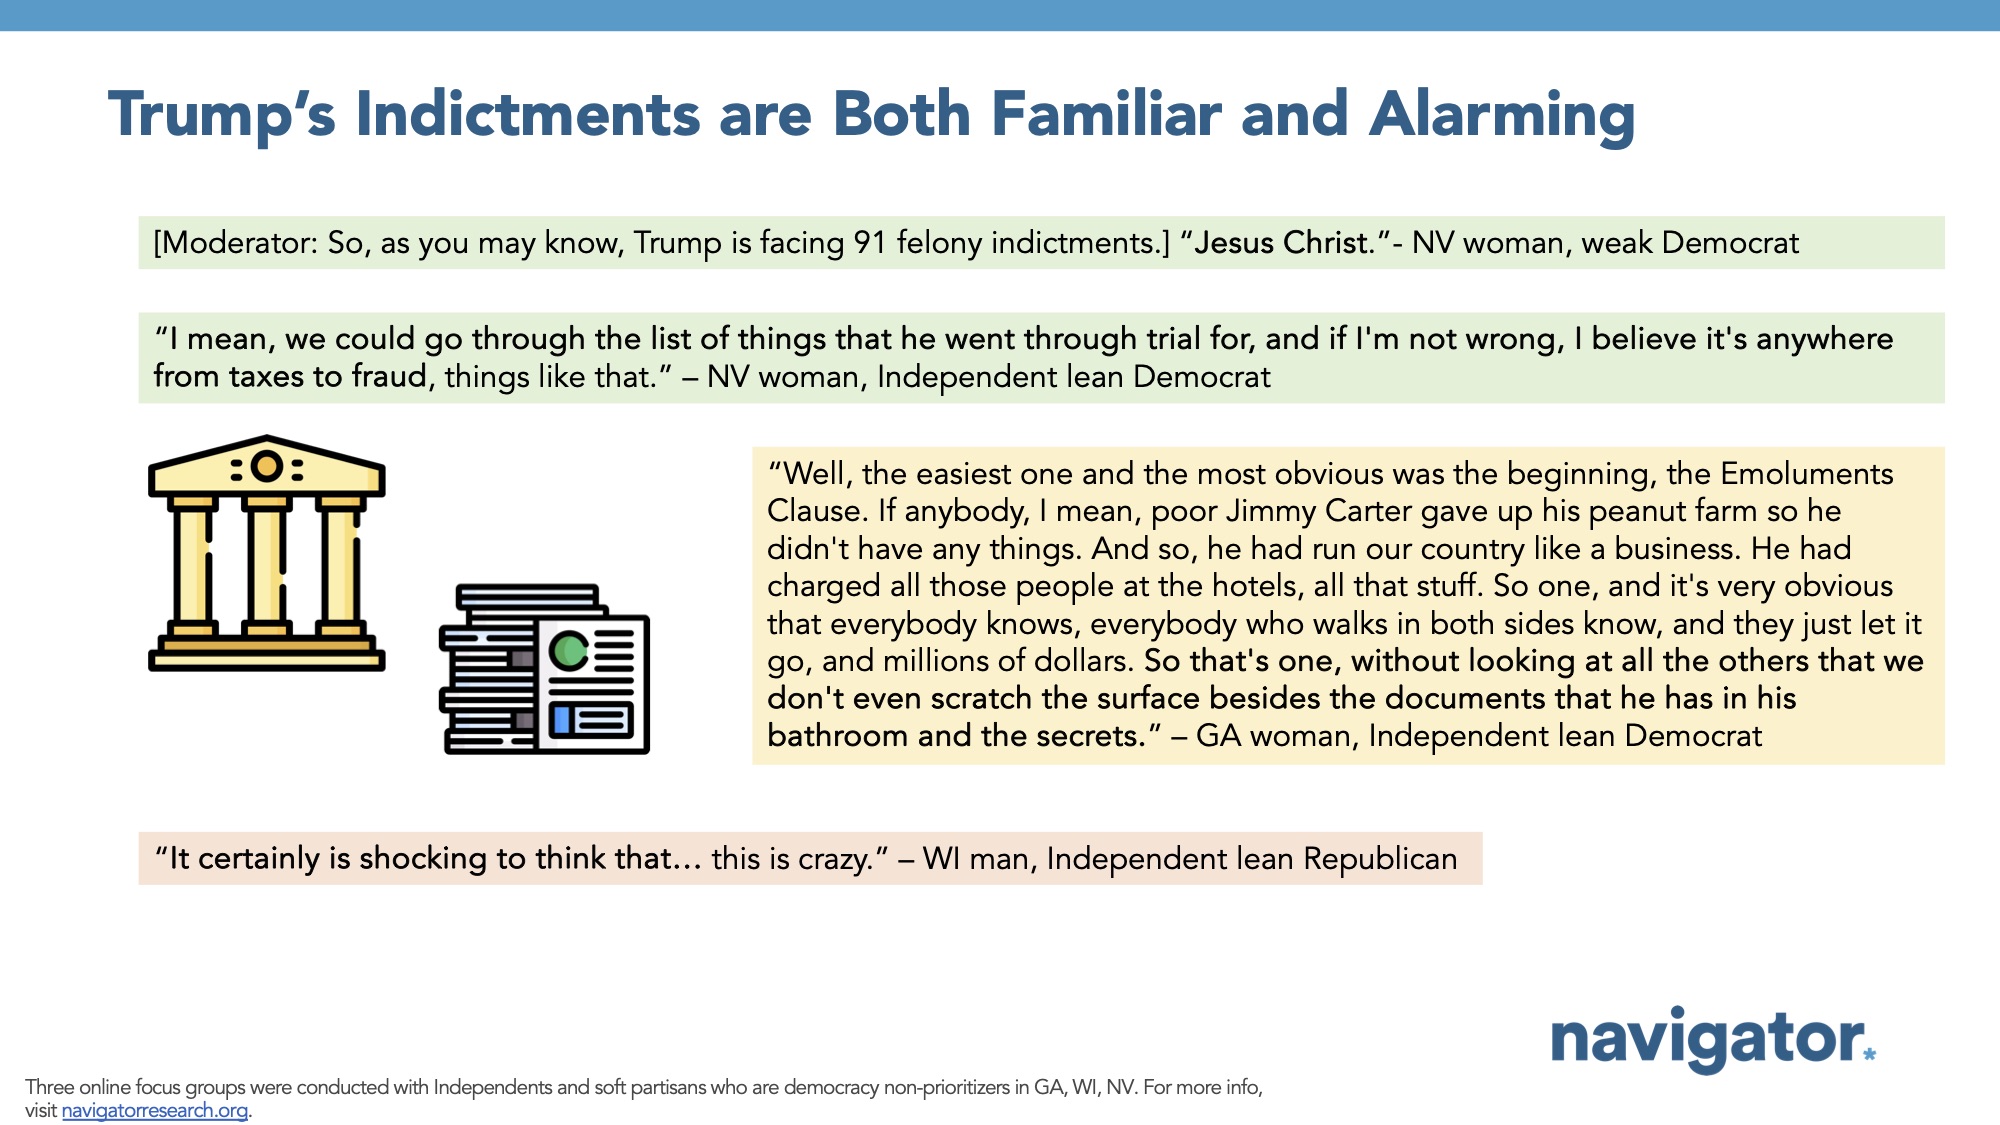 Focus group report slide titled: Trump’s Indictments are Both Familiar and Alarming